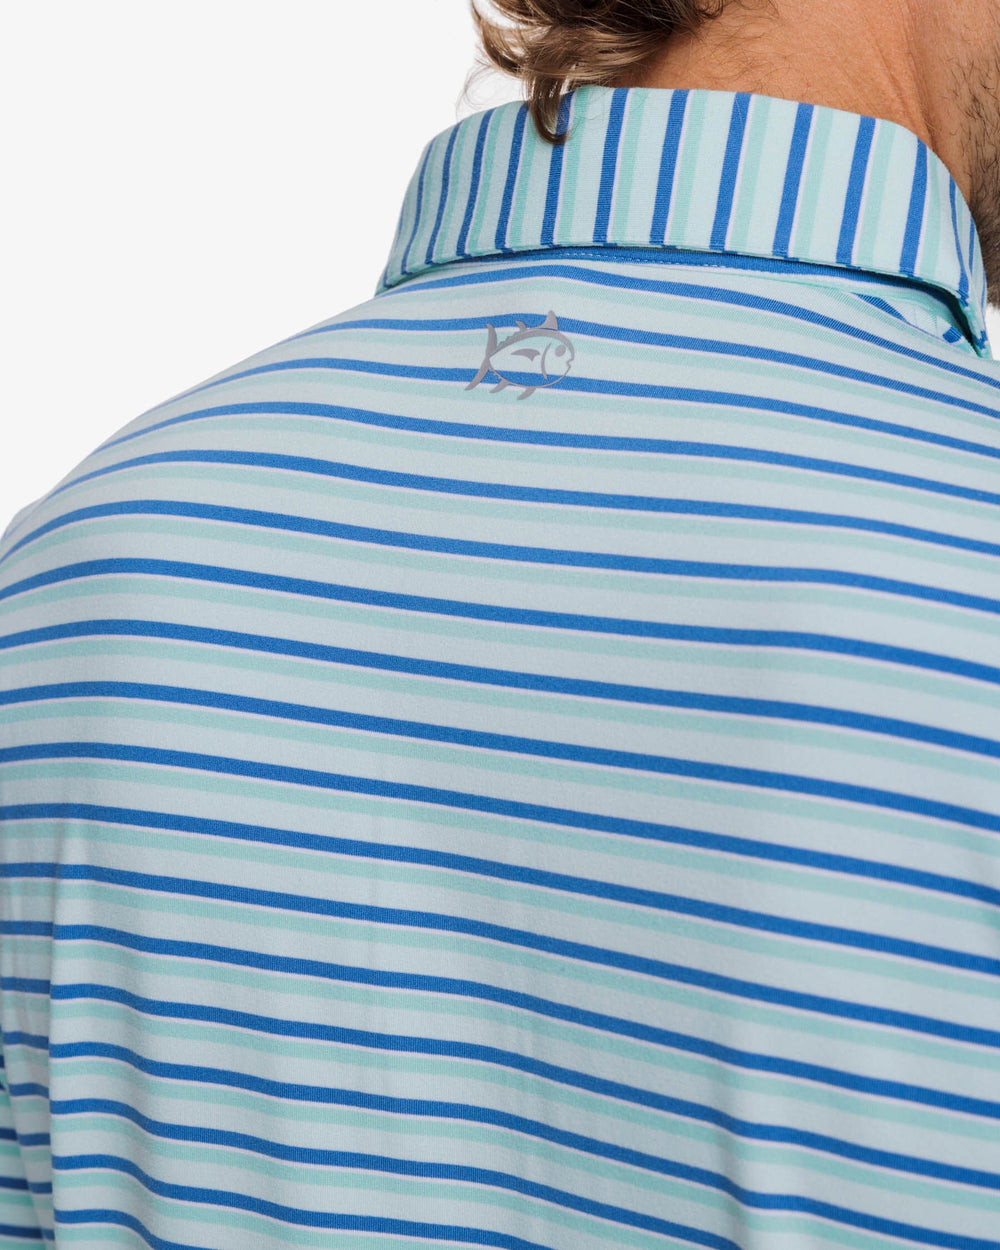 The detail view of the Southern Tide Ryder Heather Kendrick Performance Polo Shirt by Southern Tide - Heather Baltic Teal